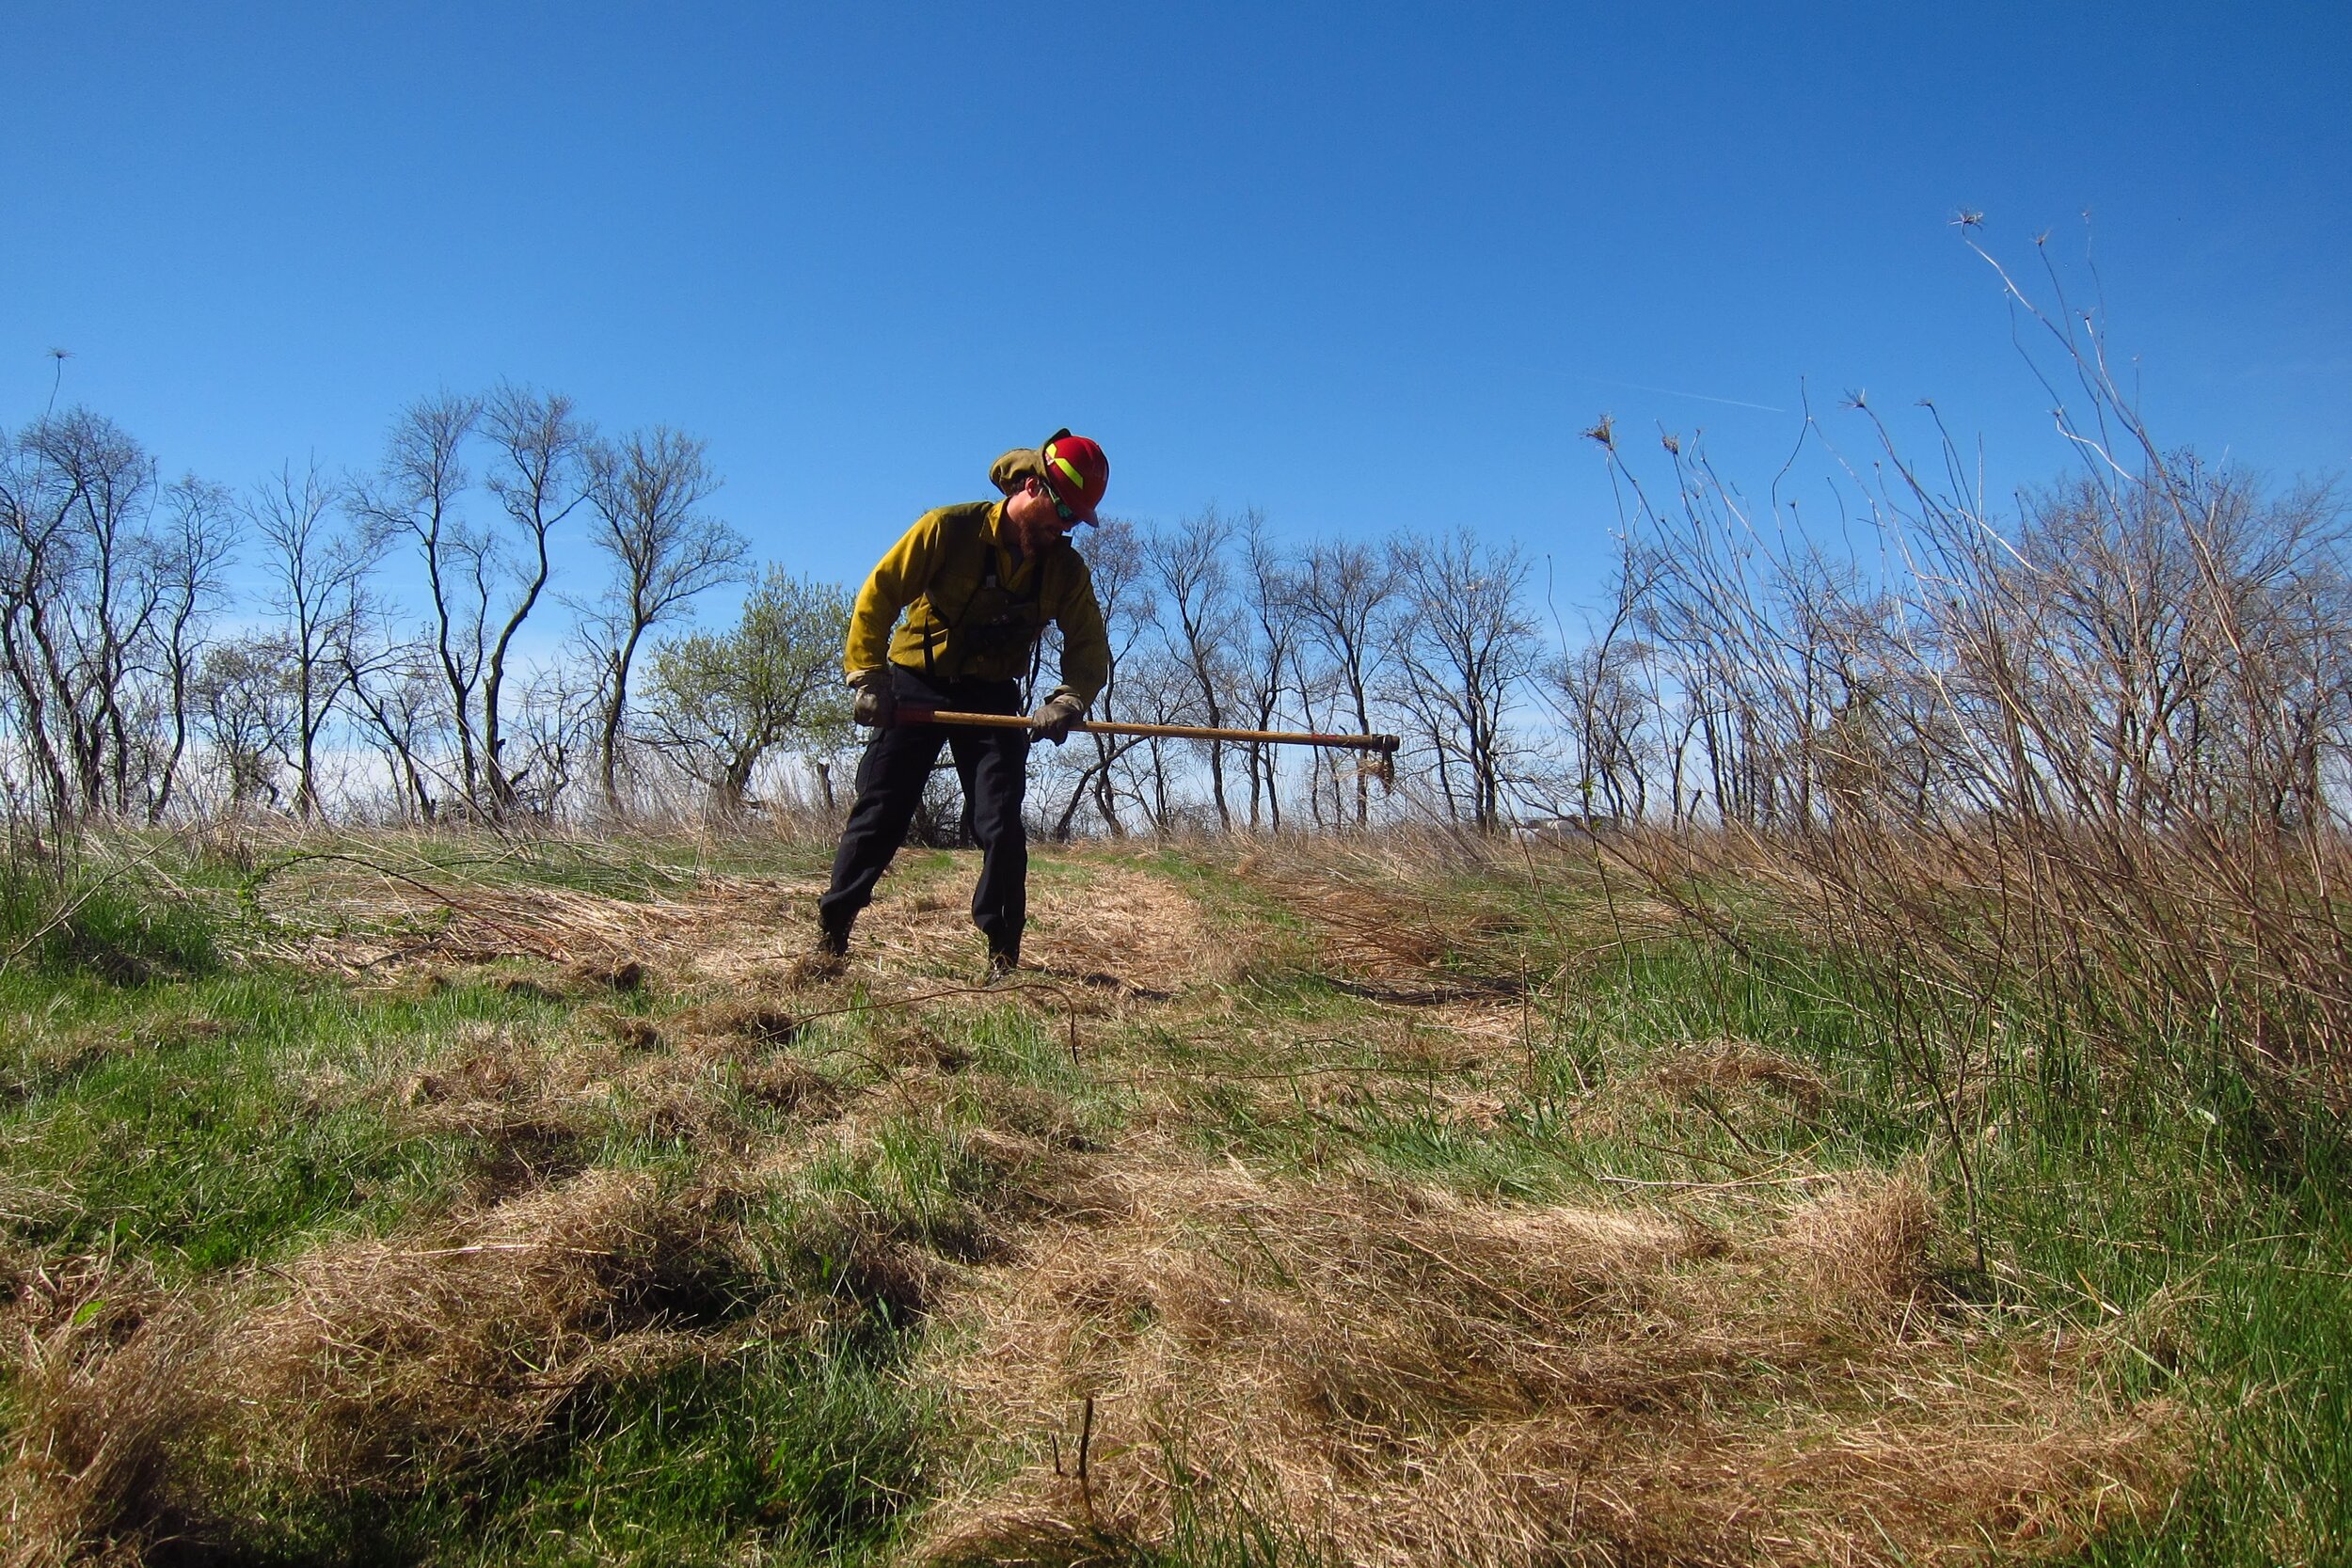  As needed, crew members install and improve firebreaks, and prep around objects needing protection from fire and heat. 